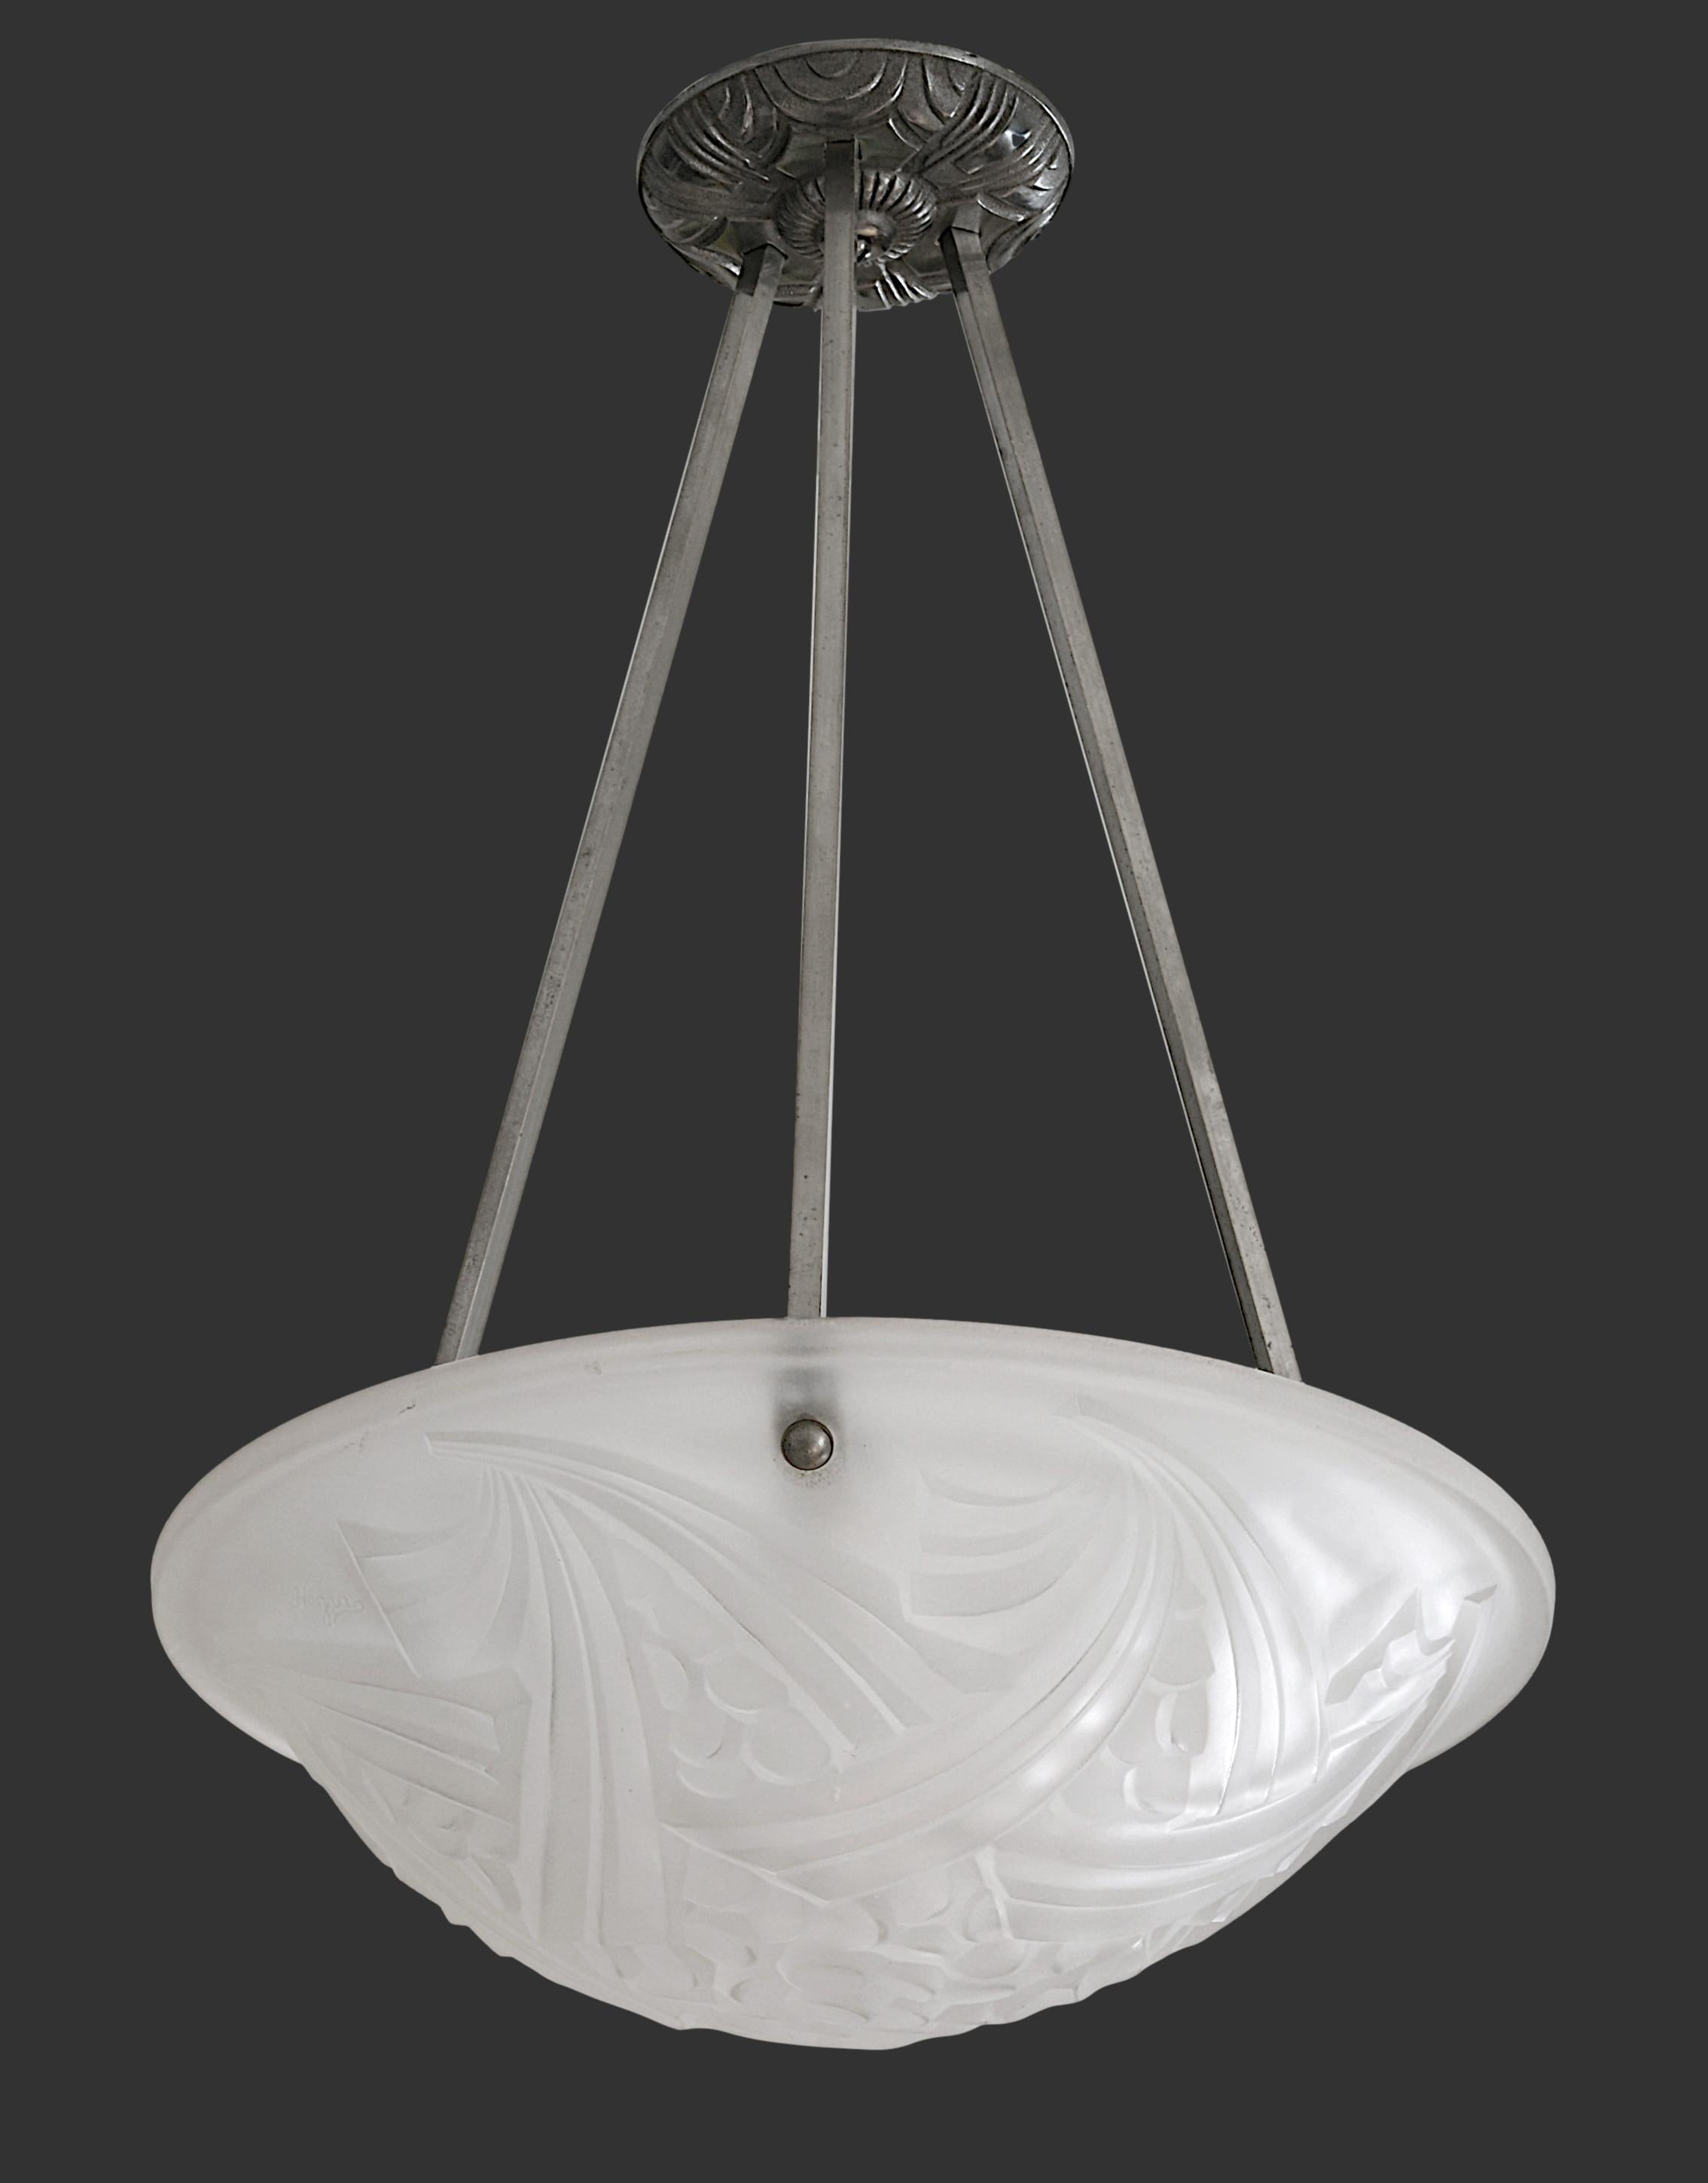 French Art Deco pendant chandelier by DEGUE (Compiegne), France, ca.1930. Mottled glass shade. Period nickel-plated fixture. Height: 20.9